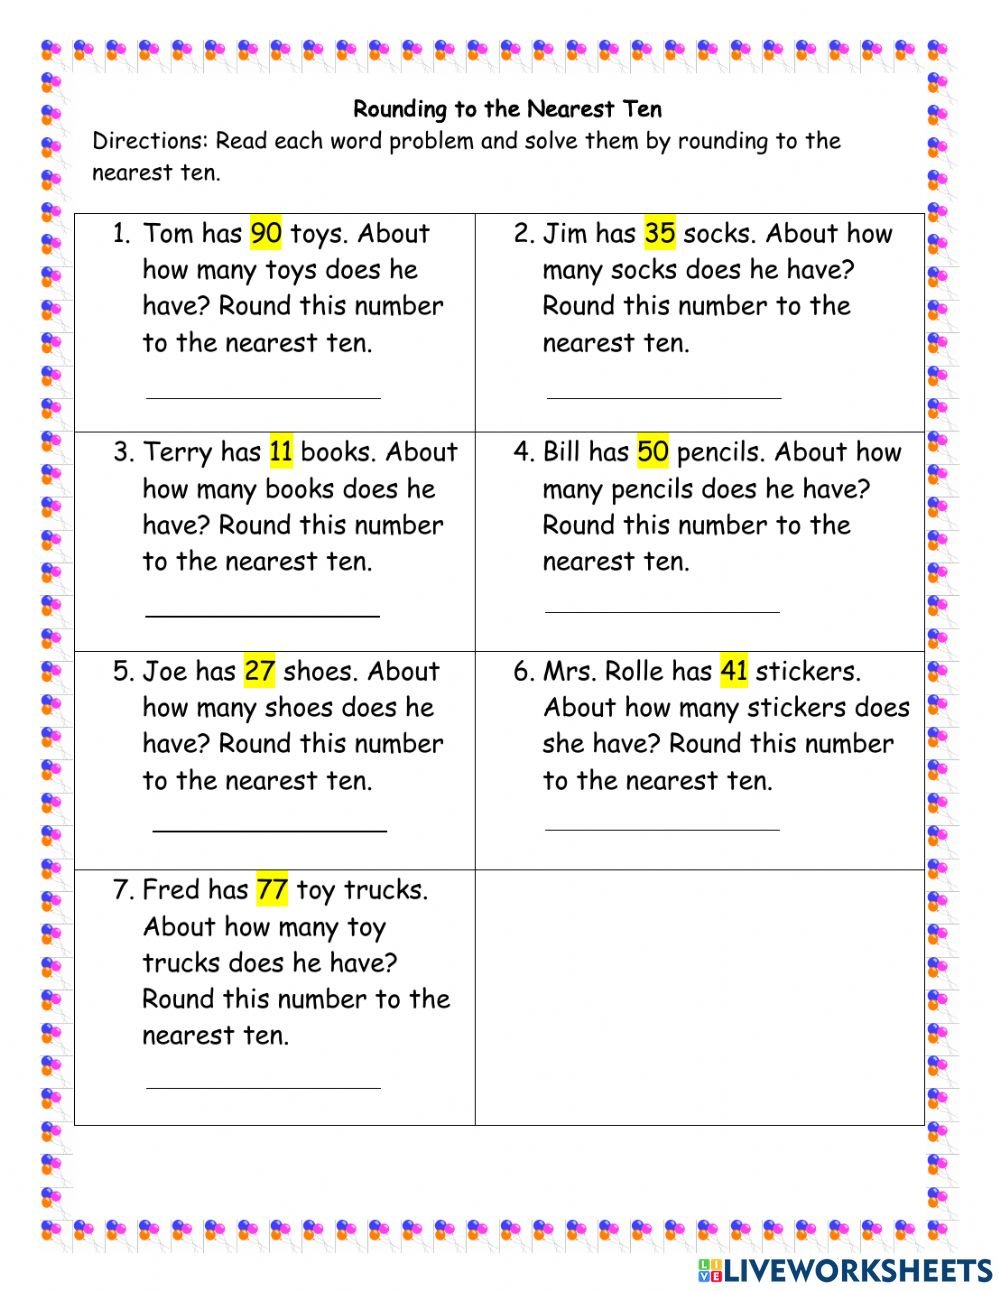 round-to-the-nearest-ten-word-problems-worksheets-worksheetscity